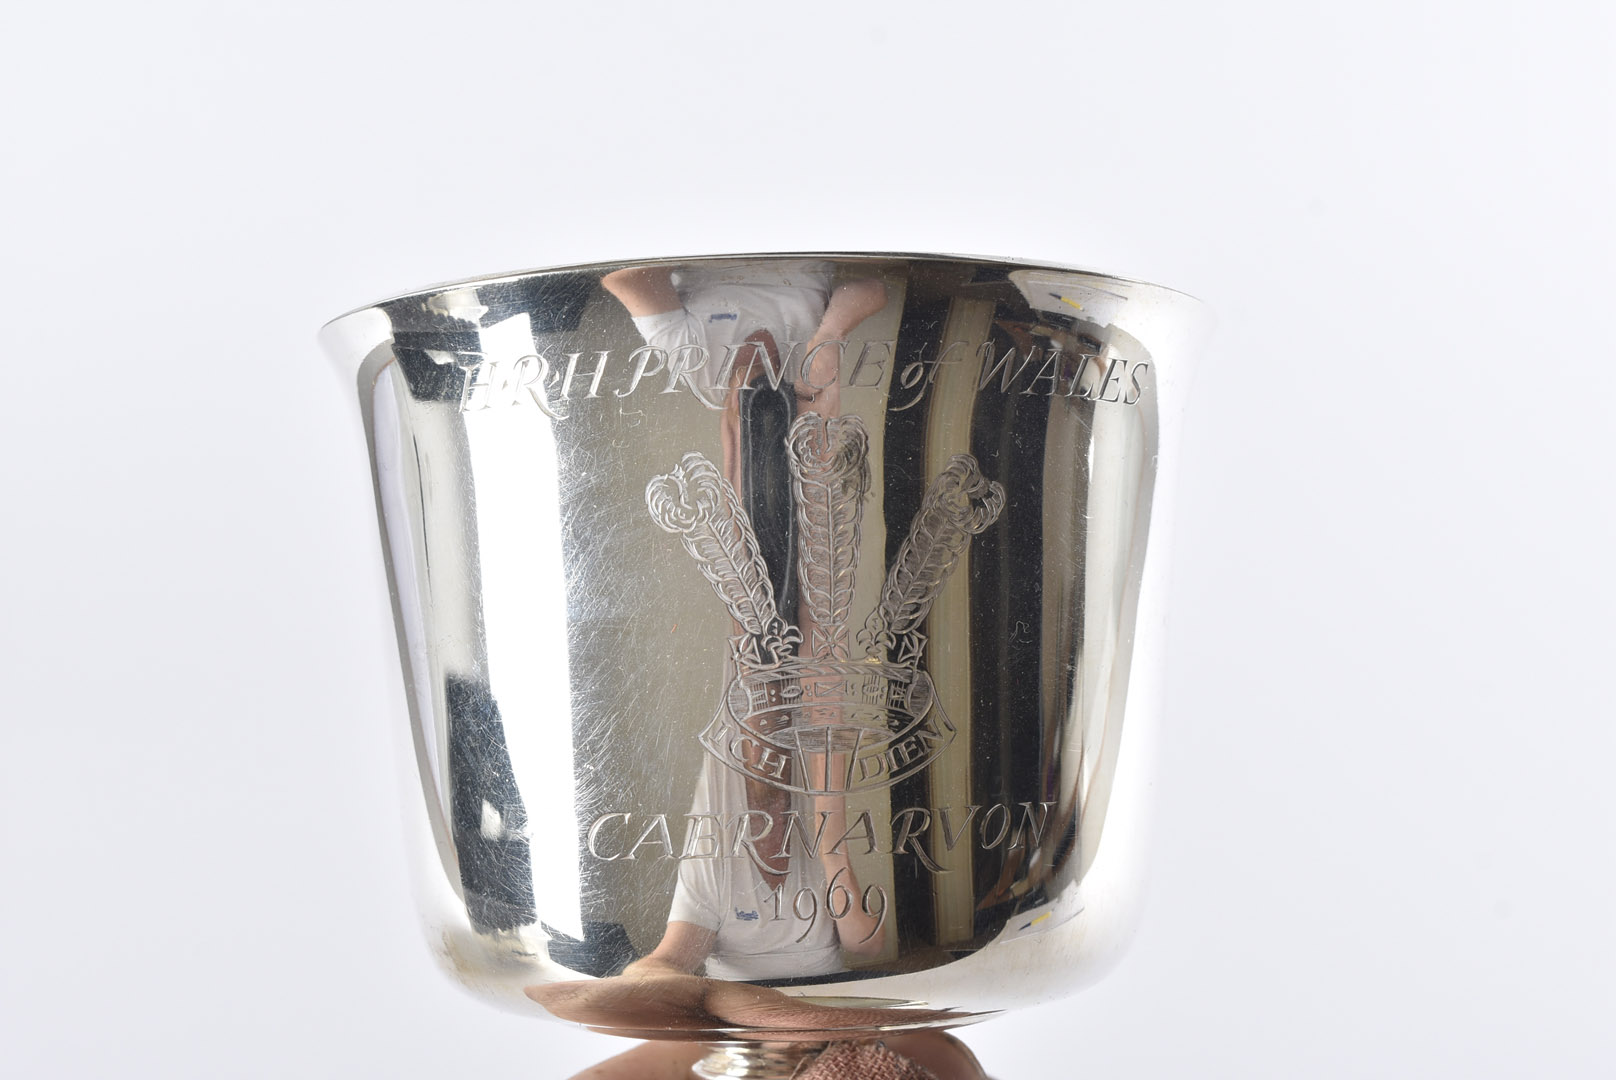 A 1960s silver commemorative goblet, celebrating the Prince of Wales Caernarvon 1969, 10.9 ozt - Image 2 of 4